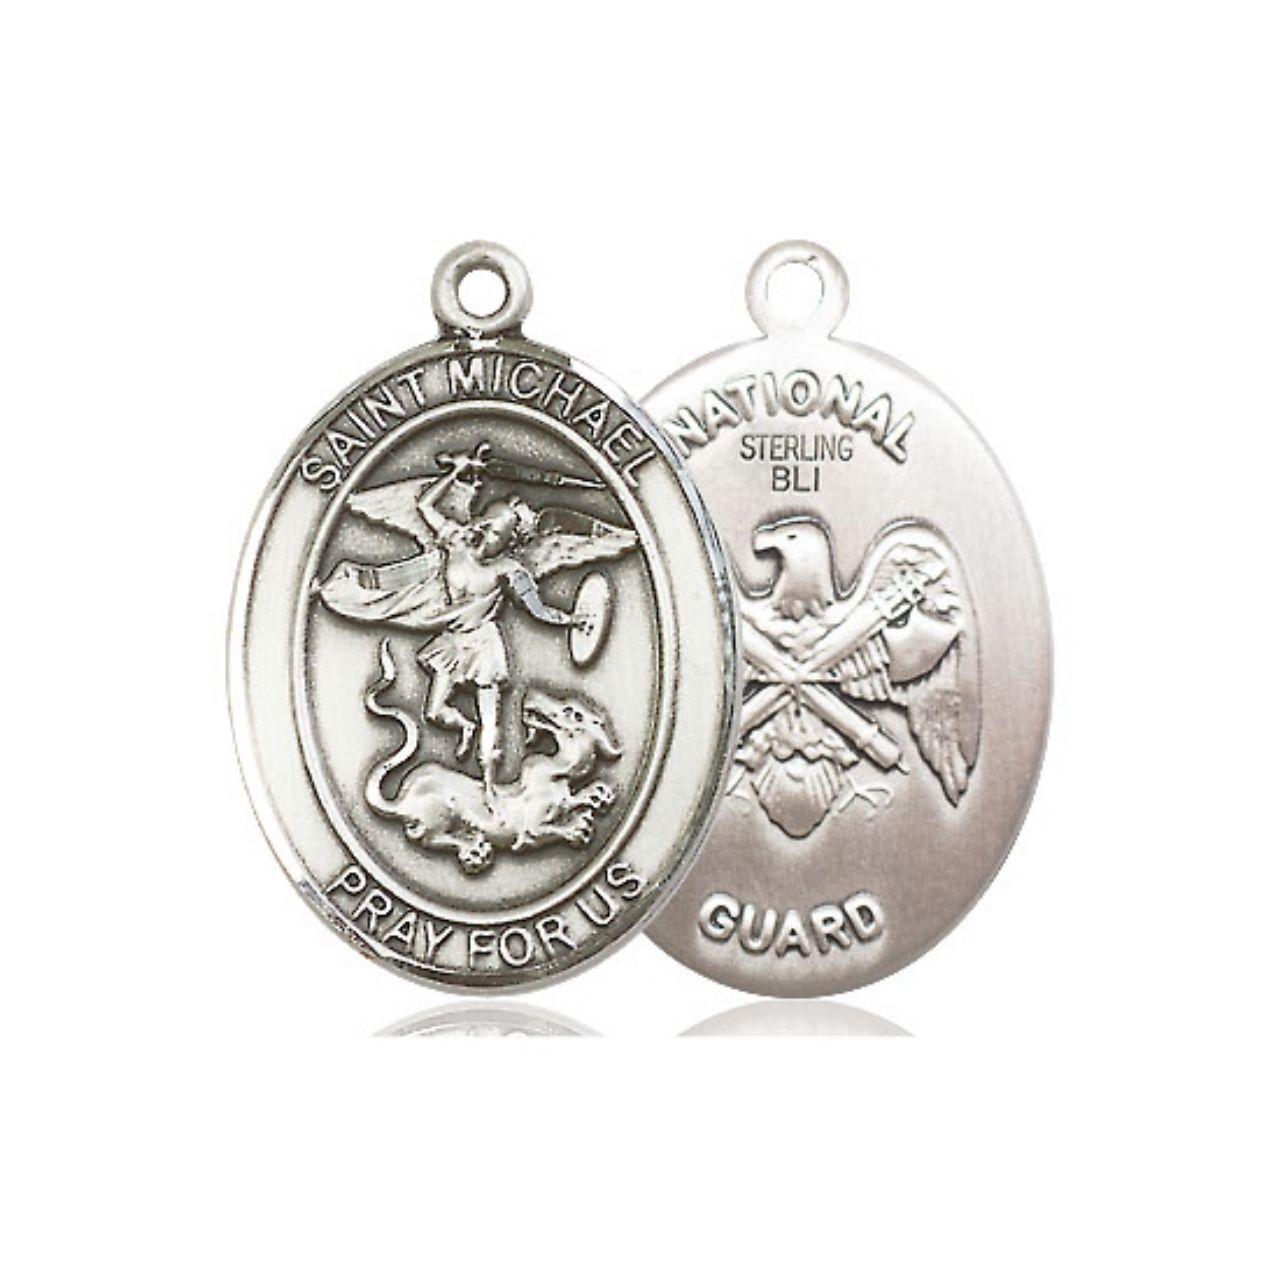 St. Michael National Guard Medal - Sterling Silver Oval Pendant (3 Sizes)